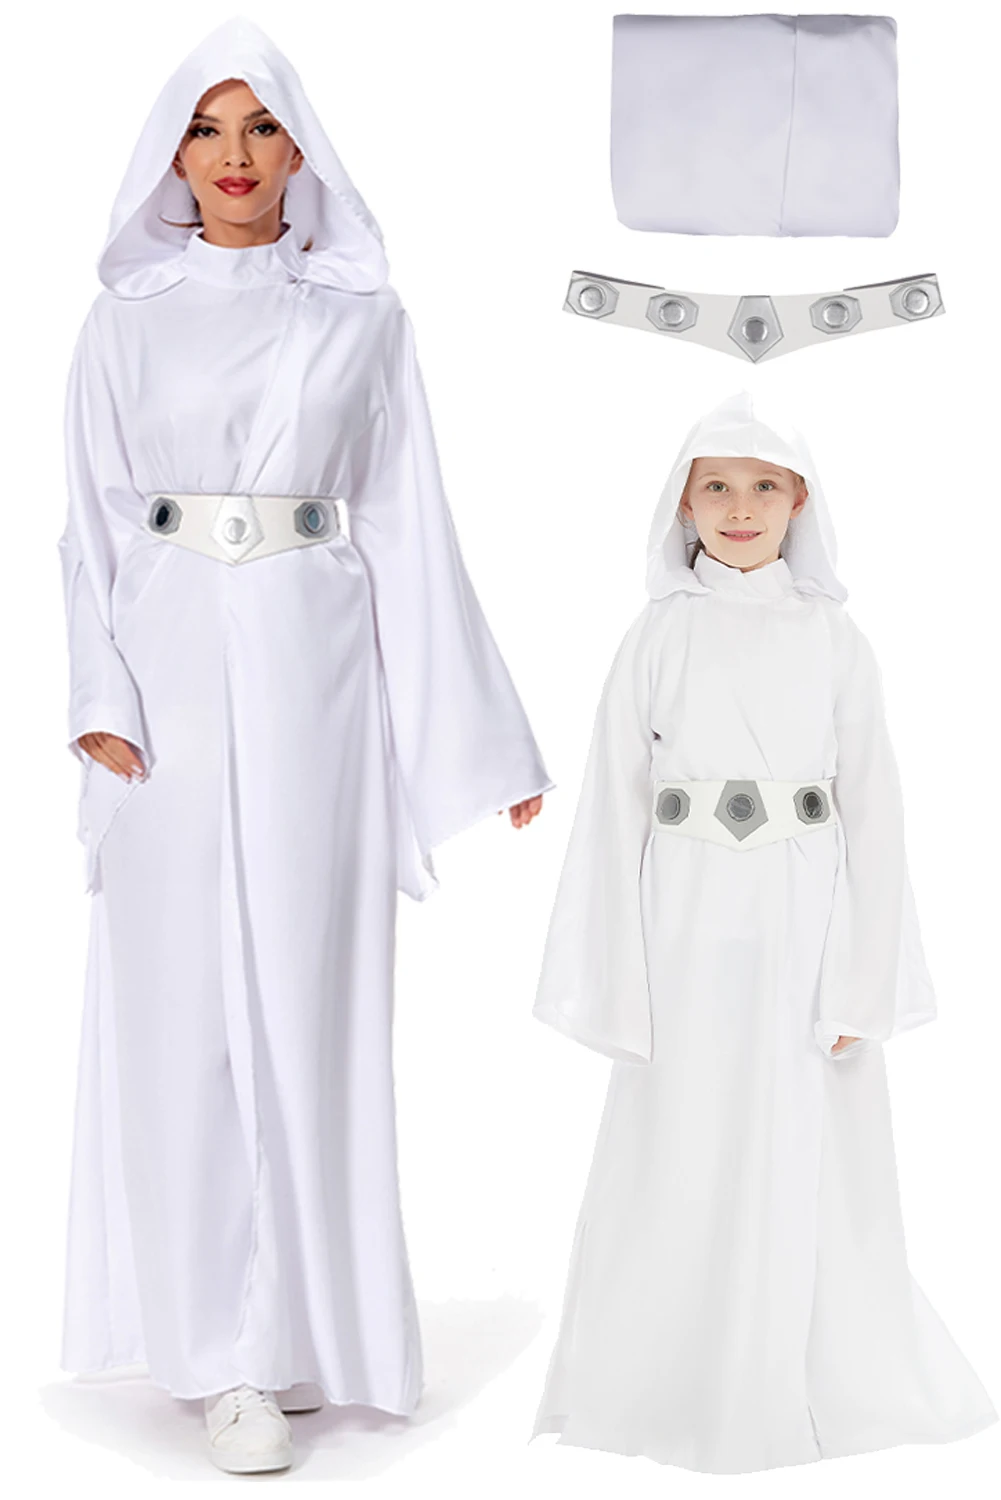 

Women Girls Leia Cosplay Role Play White Robe Movie Space Battle Princess Costume Kids Adult Fantasy Fancy Dress Party Clothes